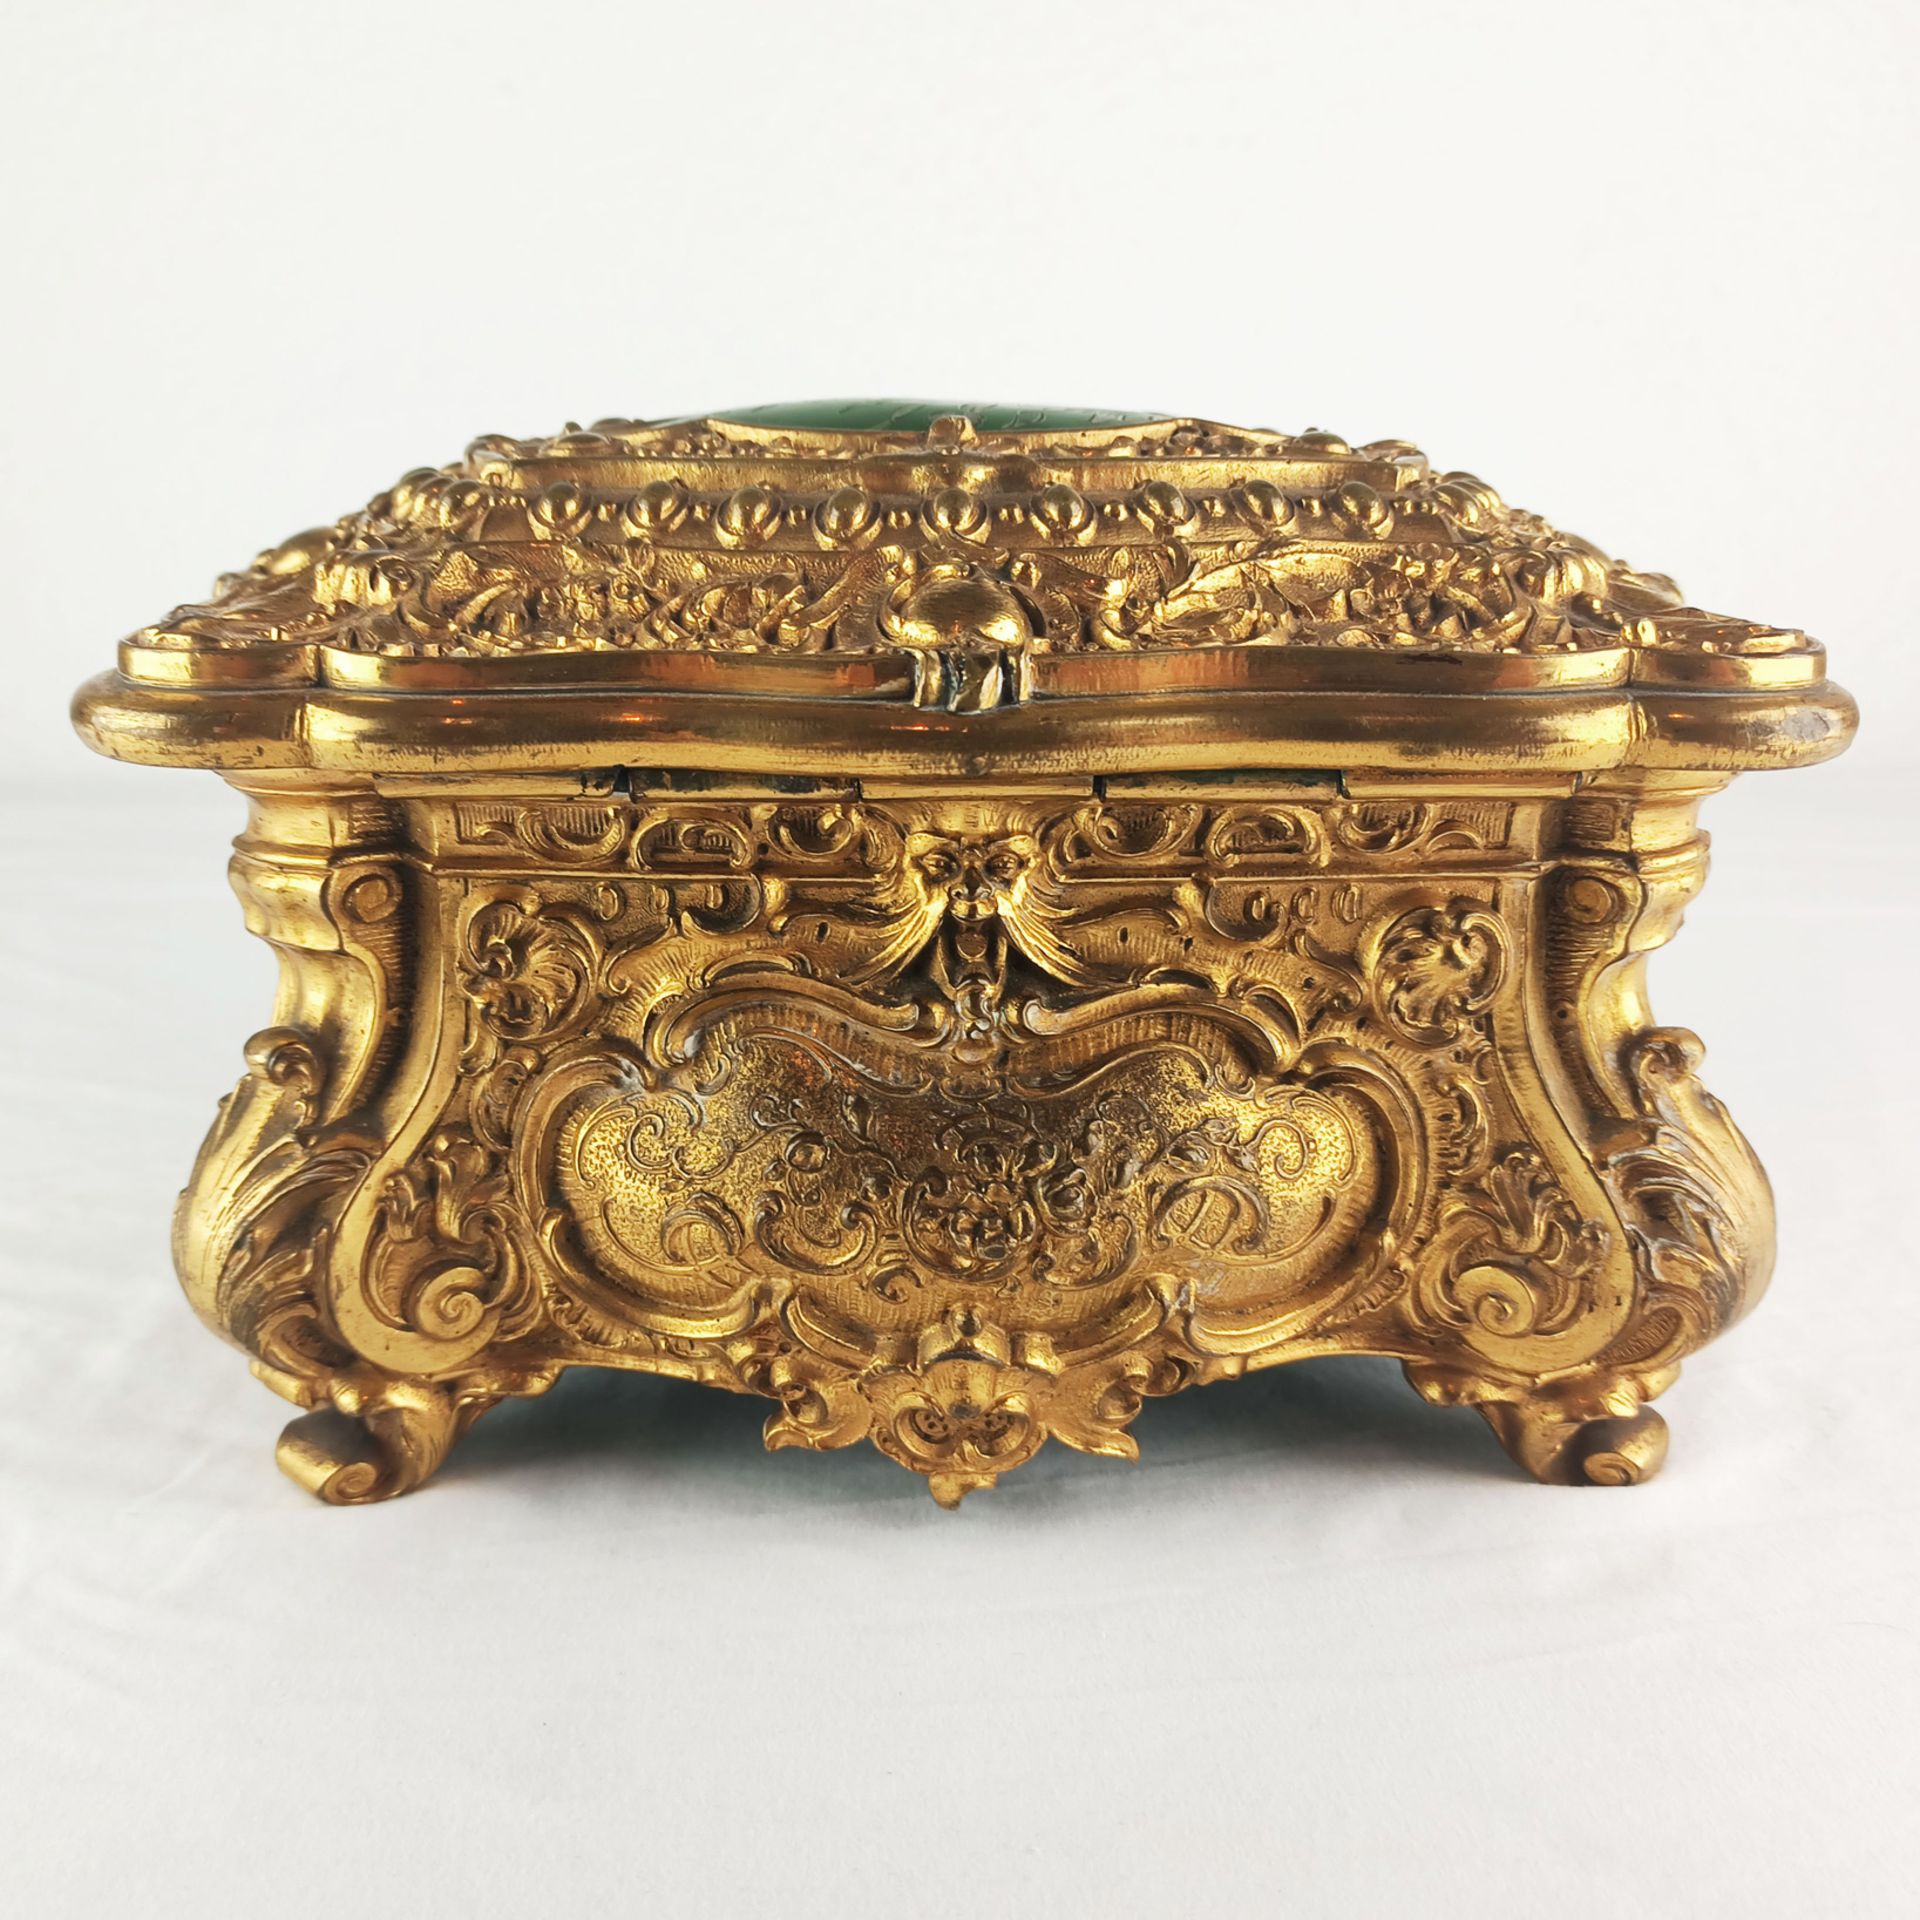 Unusual Brass and Horn Jewelry Music Box - Image 7 of 9